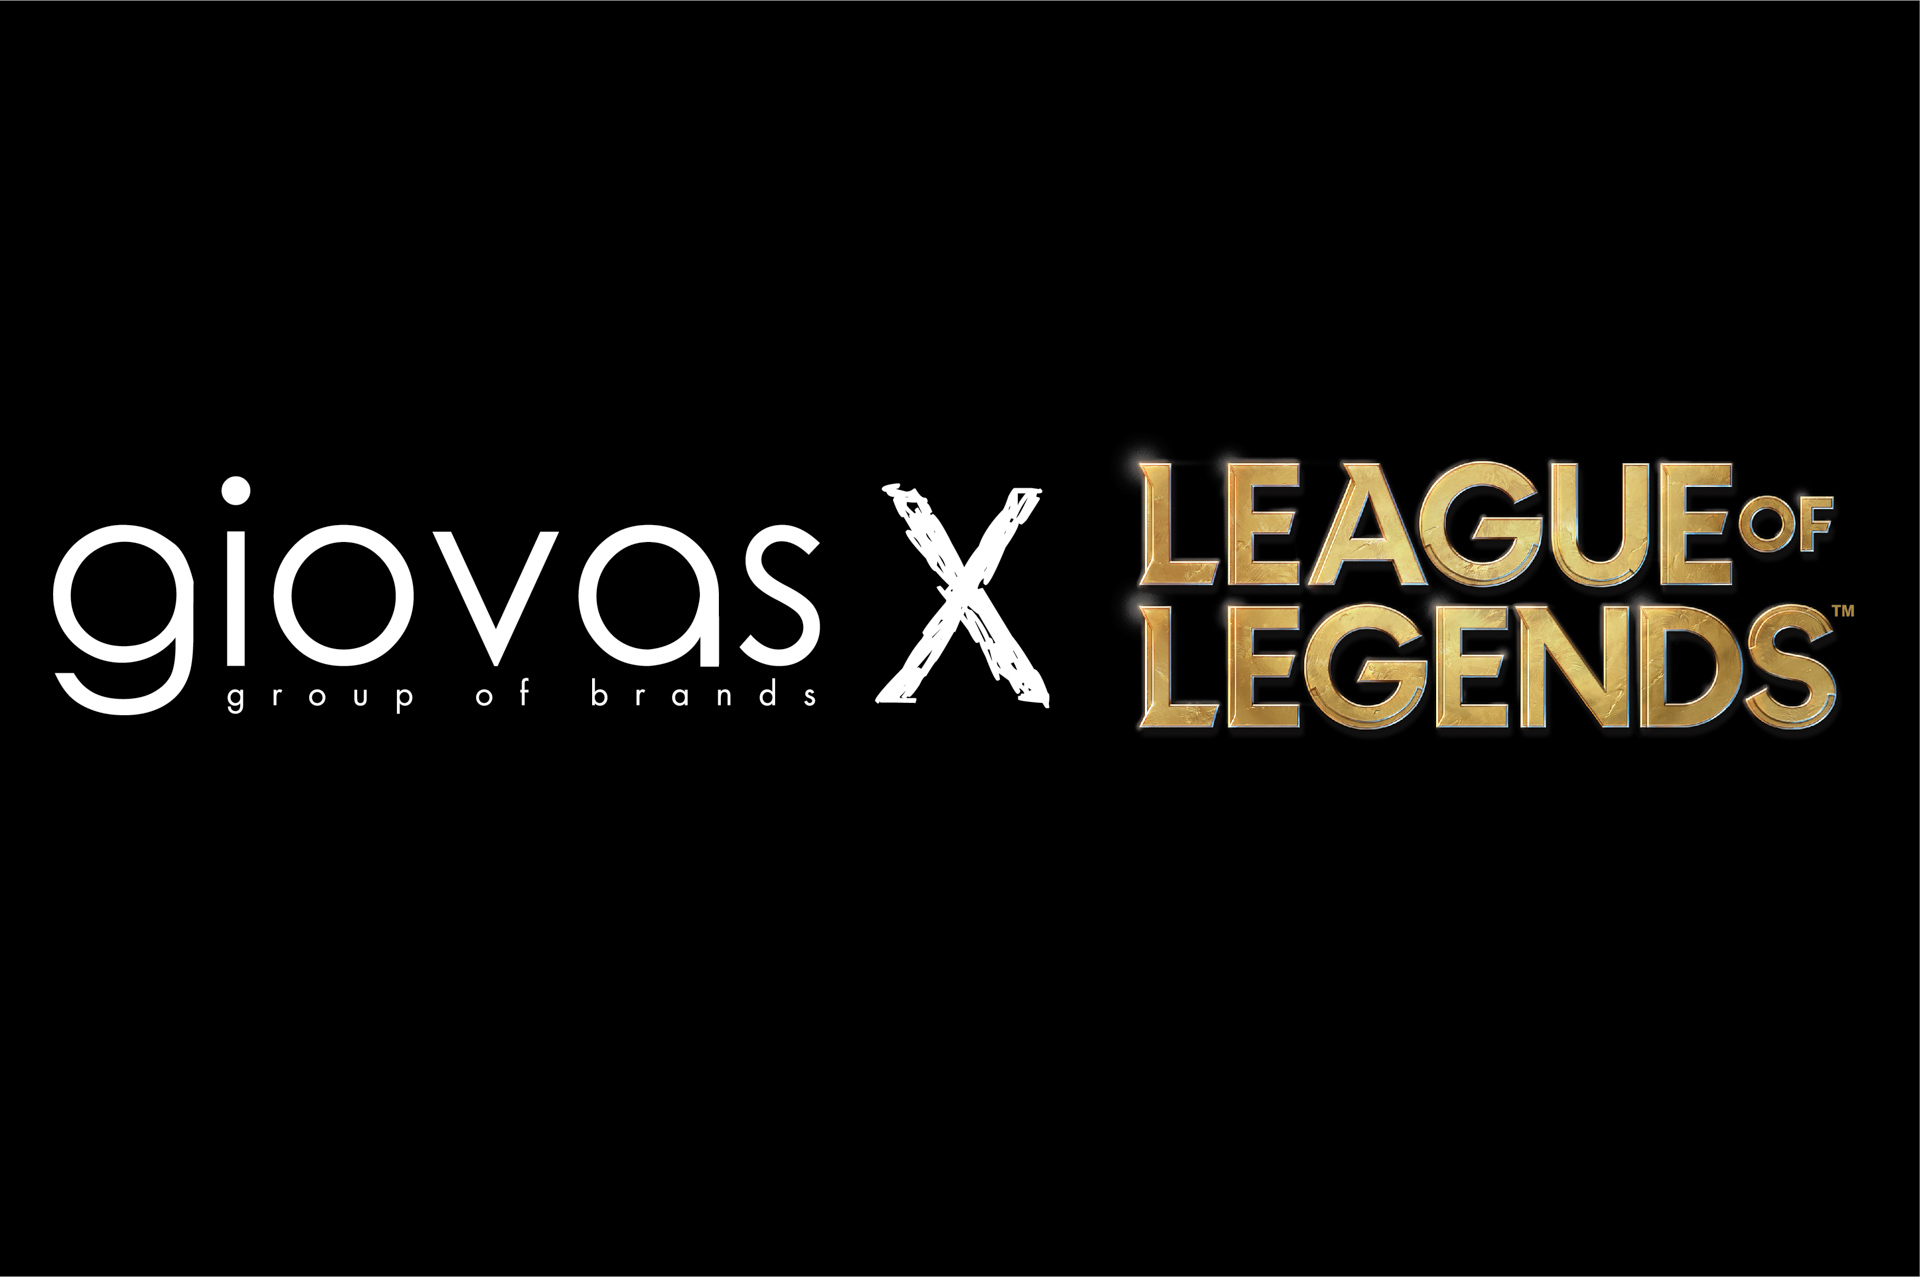 Significant collaboration between Giovas S.A. & the “Legendary